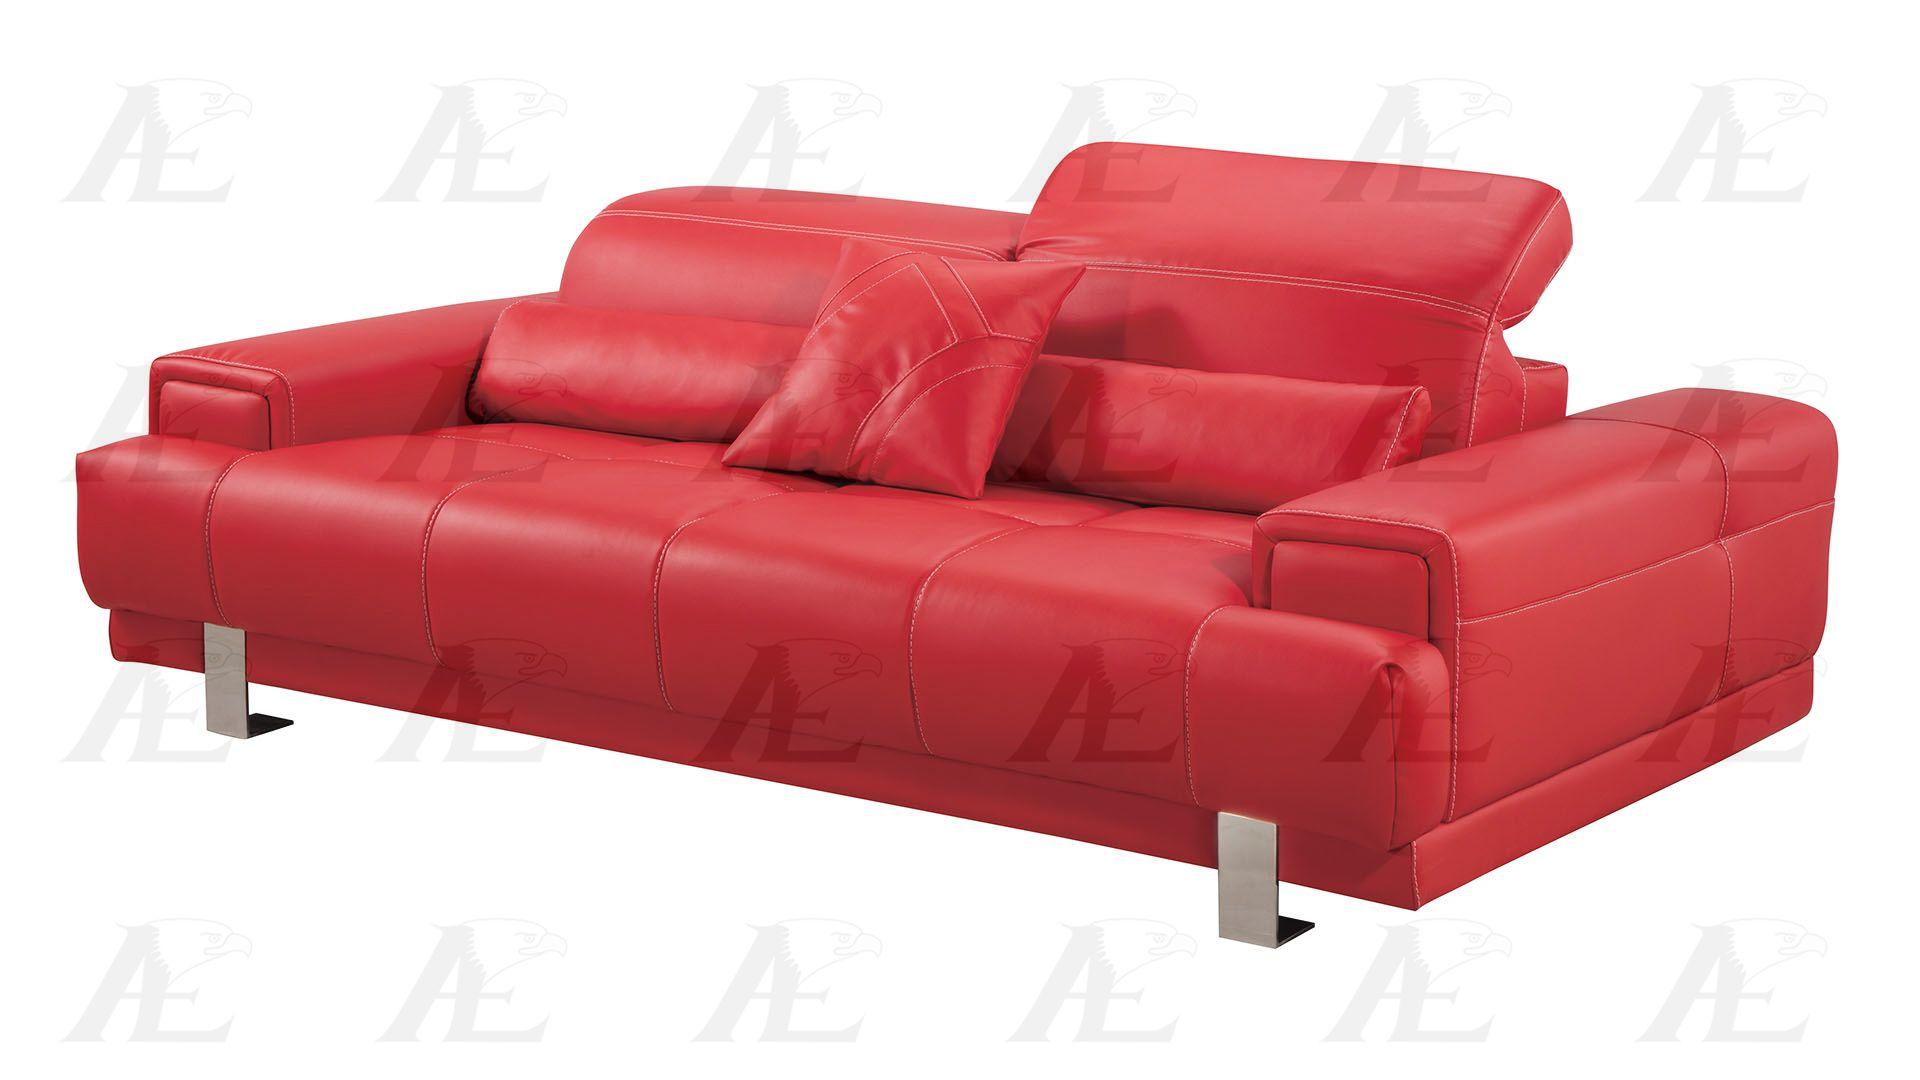 

    
American Eagle Furniture AE606-RED Sofa and Loveseat Set Red AE606-RED-Set-2
